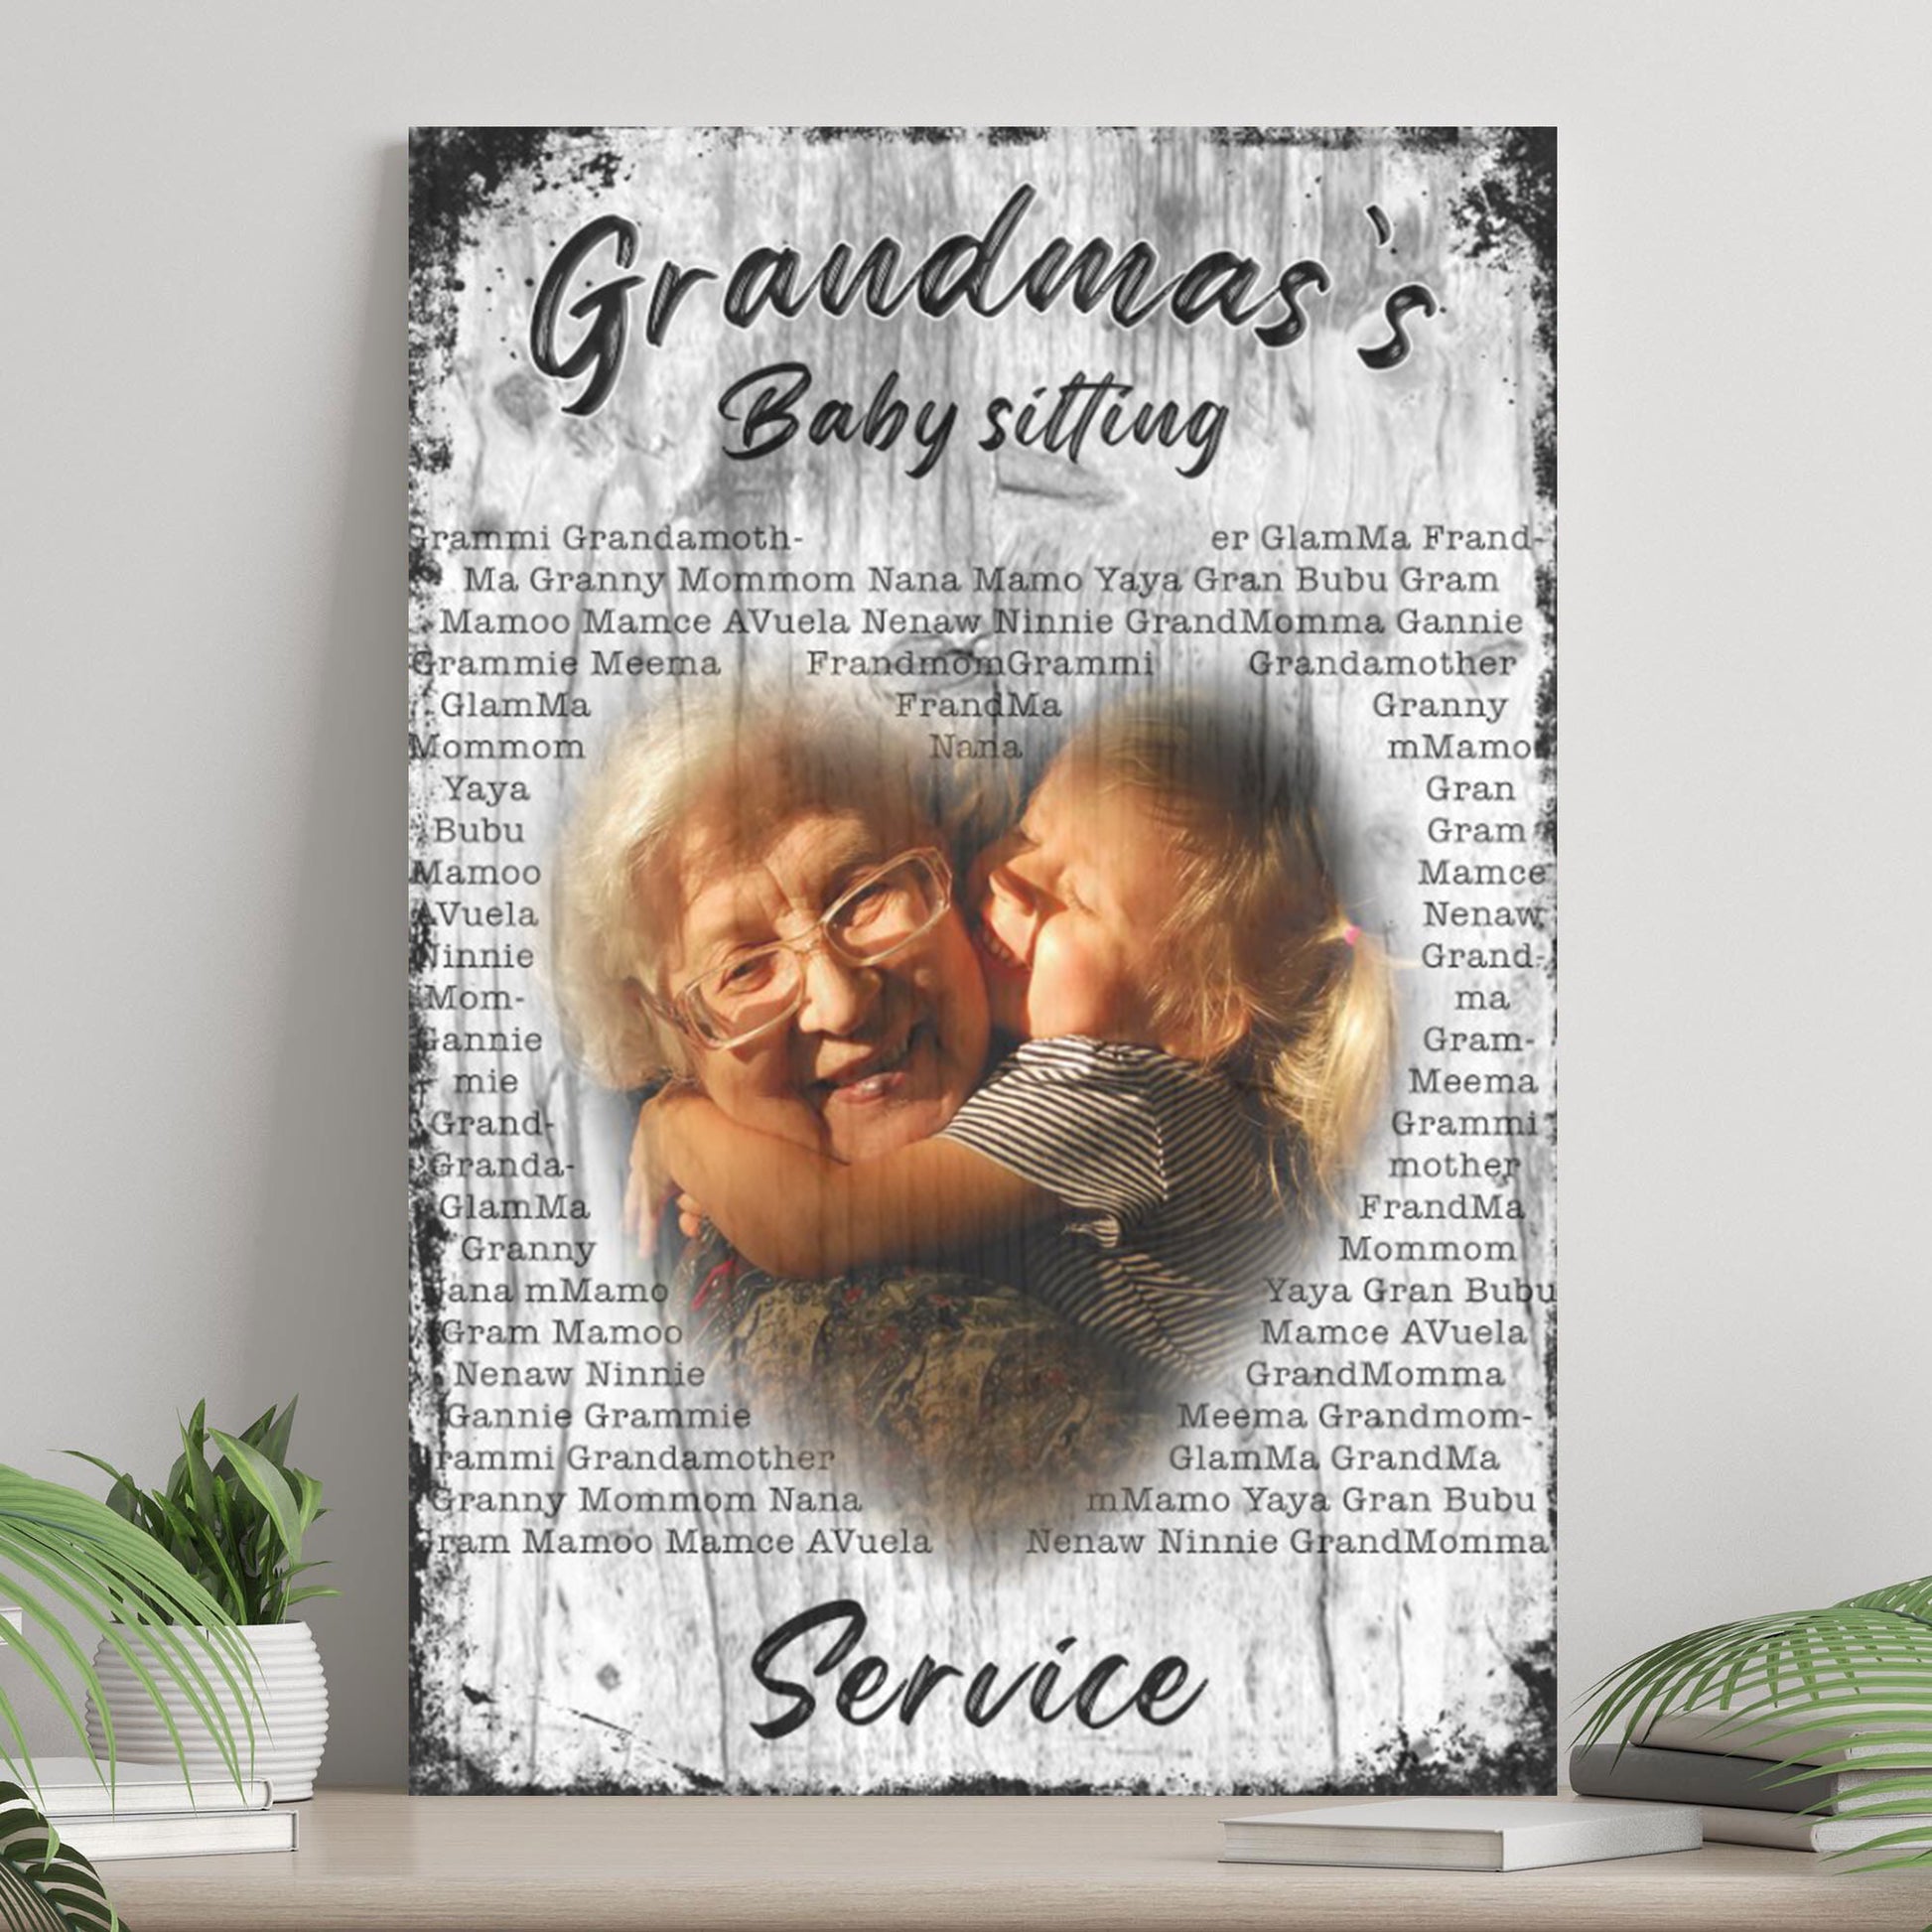 Grandmas's Baby Sitting Service Sign - Image by Tailored Canvases